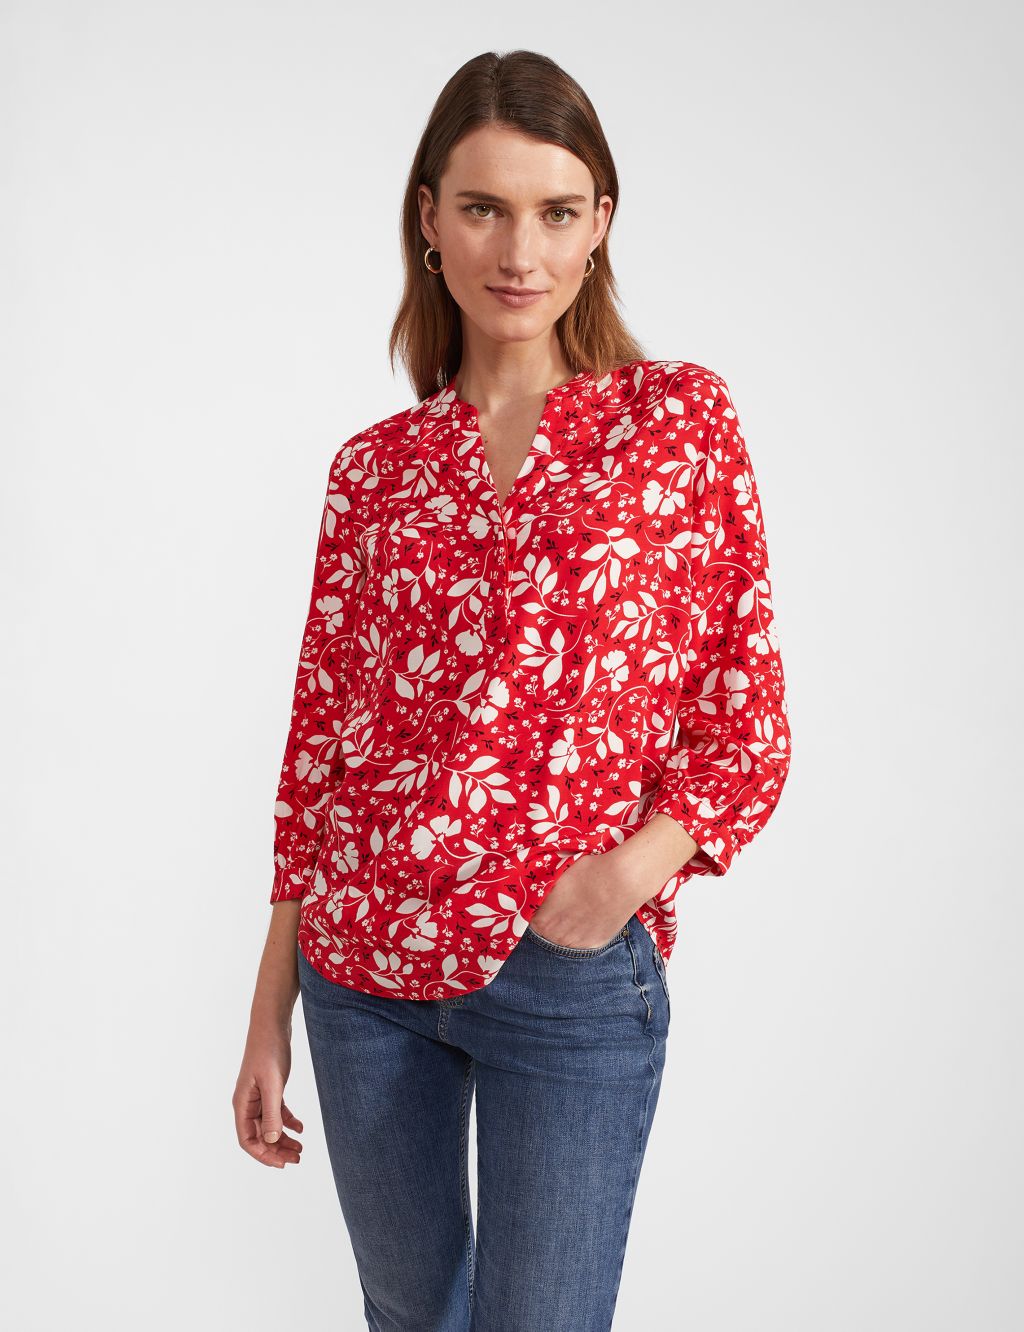 Women's Red Shirts & Blouses